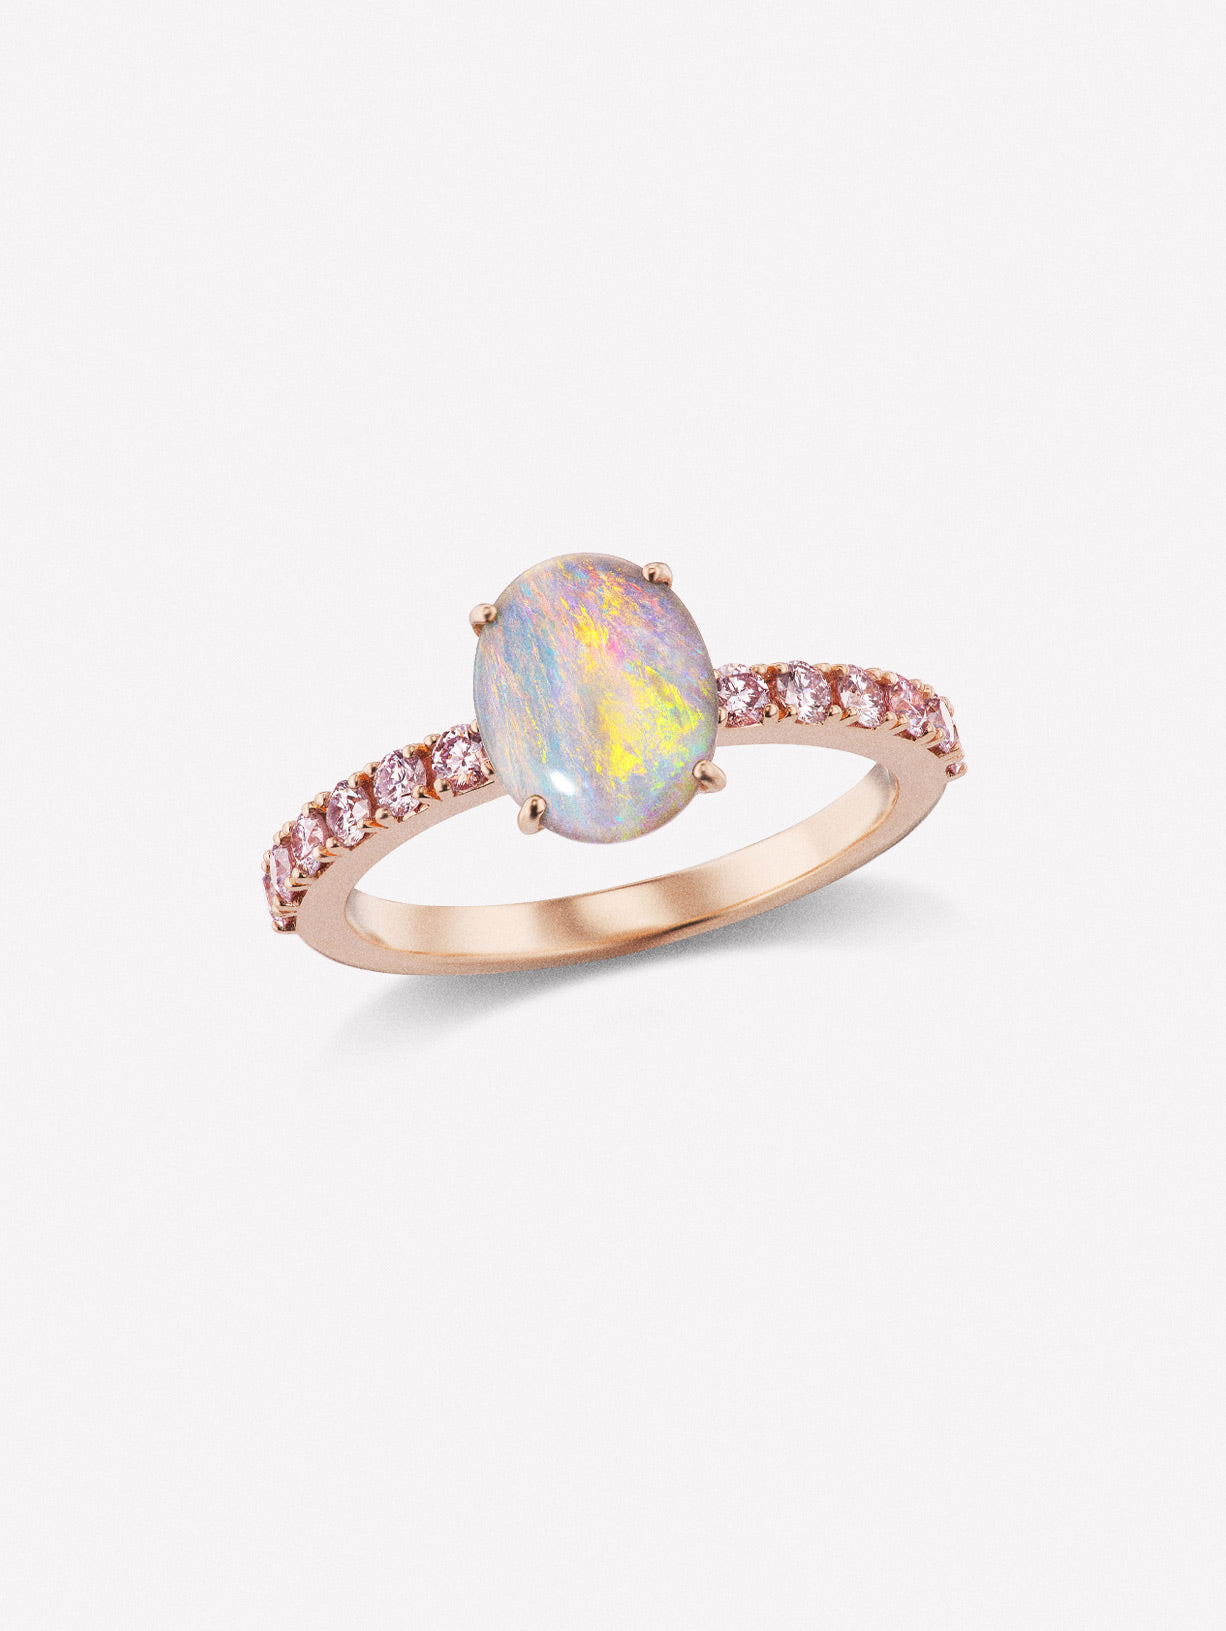 Argyle Pink™ Diamond and Opal Stacking Ring - Pink Diamonds, J FINE - J Fine, Rings - Pink Diamond Jewelry, argyle-pink™-diamond-and-opal-stacking-ring-by-j-fine-3 - Argyle Pink Diamonds